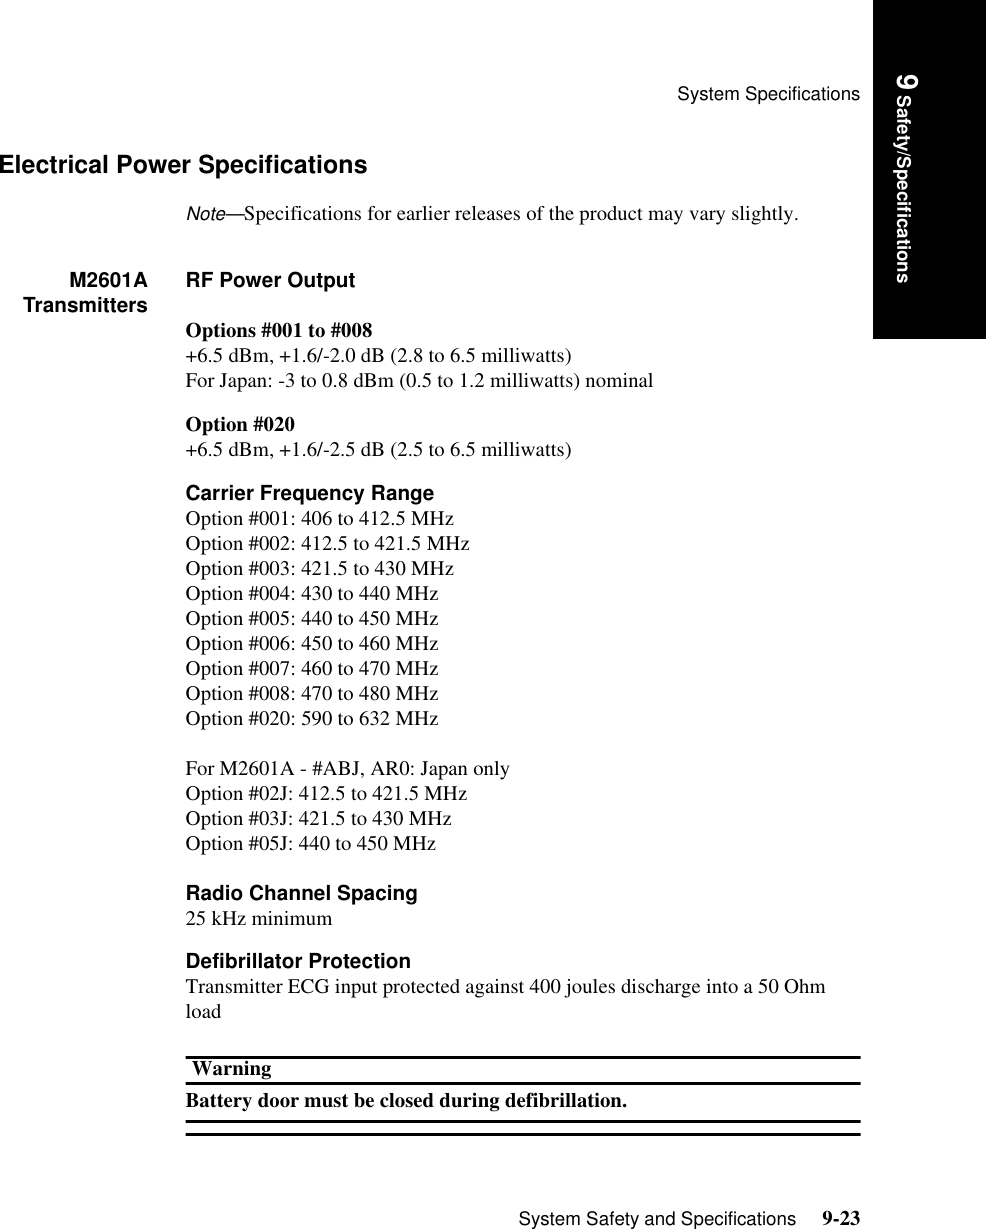 System SpecificationsSystem Safety and Specifications     9-239 Safety/SpecificationsElectrical Power SpecificationsNote—Specifications for earlier releases of the product may vary slightly.M2601ATransmitters RF Power OutputOptions #001 to #008+6.5 dBm, +1.6/-2.0 dB (2.8 to 6.5 milliwatts)For Japan: -3 to 0.8 dBm (0.5 to 1.2 milliwatts) nominalOption #020+6.5 dBm, +1.6/-2.5 dB (2.5 to 6.5 milliwatts)Carrier Frequency RangeOption #001: 406 to 412.5 MHzOption #002: 412.5 to 421.5 MHzOption #003: 421.5 to 430 MHzOption #004: 430 to 440 MHzOption #005: 440 to 450 MHzOption #006: 450 to 460 MHzOption #007: 460 to 470 MHzOption #008: 470 to 480 MHzOption #020: 590 to 632 MHzFor M2601A - #ABJ, AR0: Japan onlyOption #02J: 412.5 to 421.5 MHzOption #03J: 421.5 to 430 MHzOption #05J: 440 to 450 MHzRadio Channel Spacing25 kHz minimumDefibrillator ProtectionTransmitter ECG input protected against 400 joules discharge into a 50 Ohm loadWarningBattery door must be closed during defibrillation.